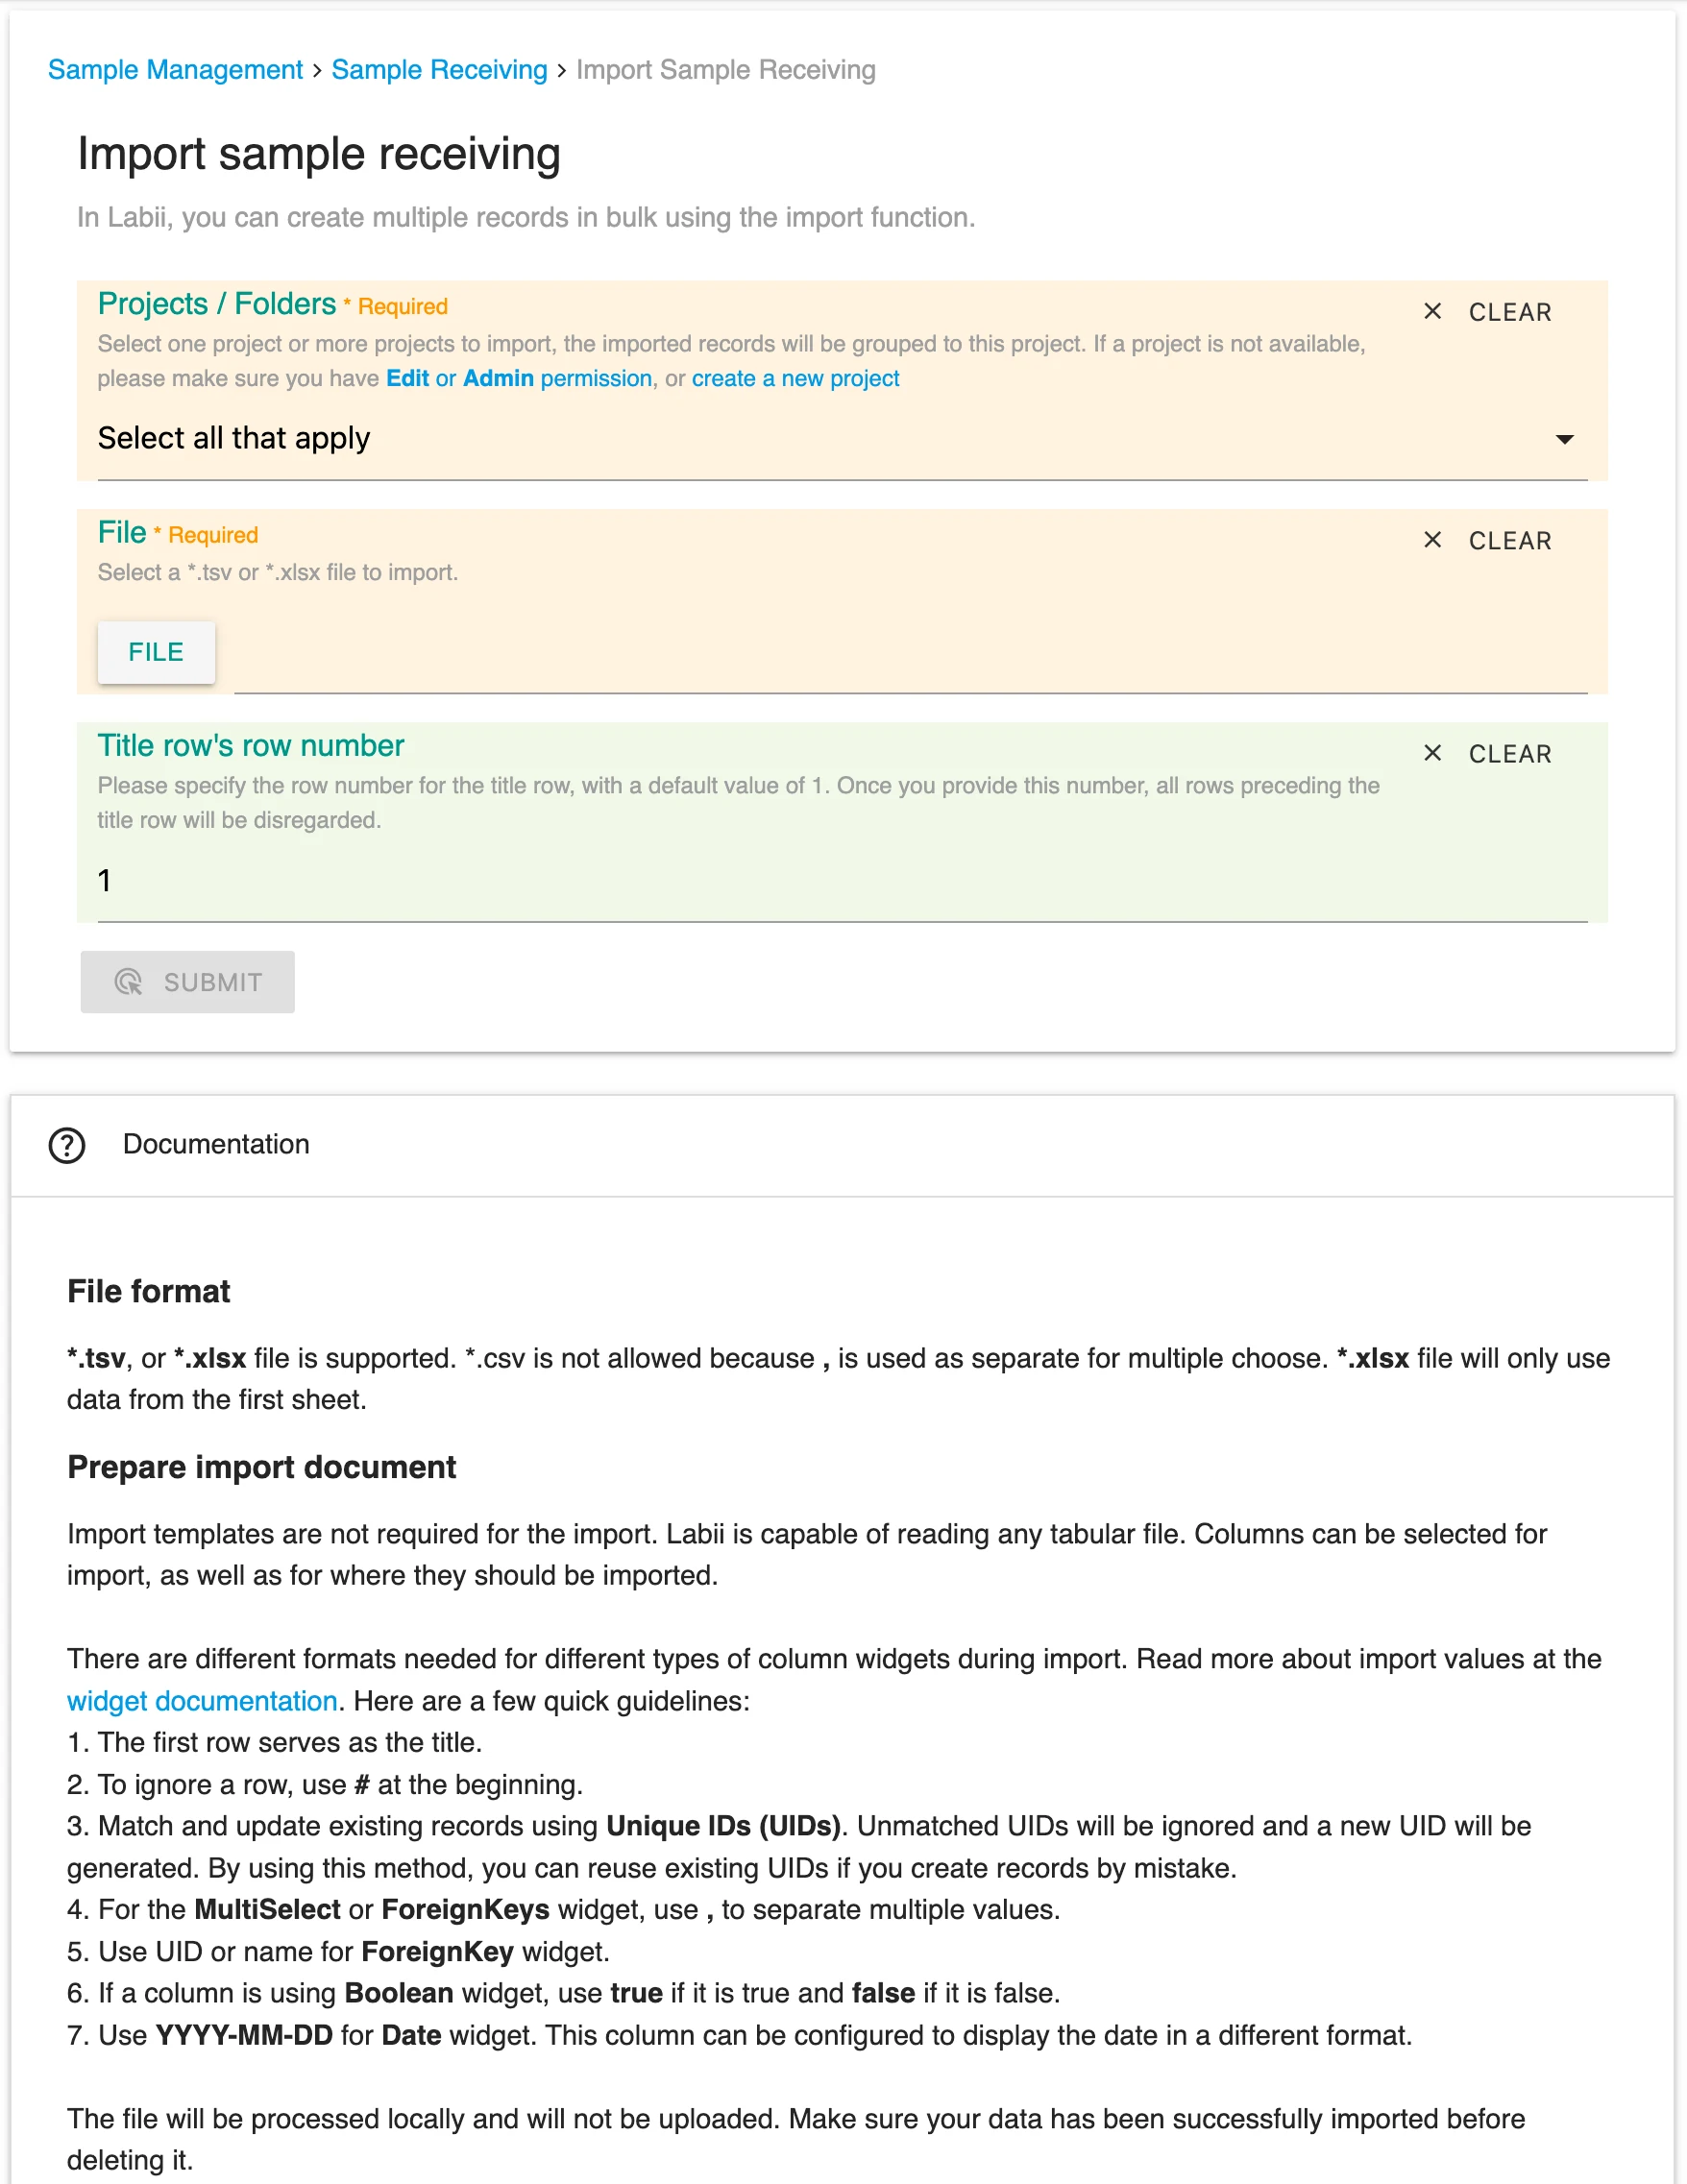 Instant Insights: Explore Labii's In-Page Documentation Feature